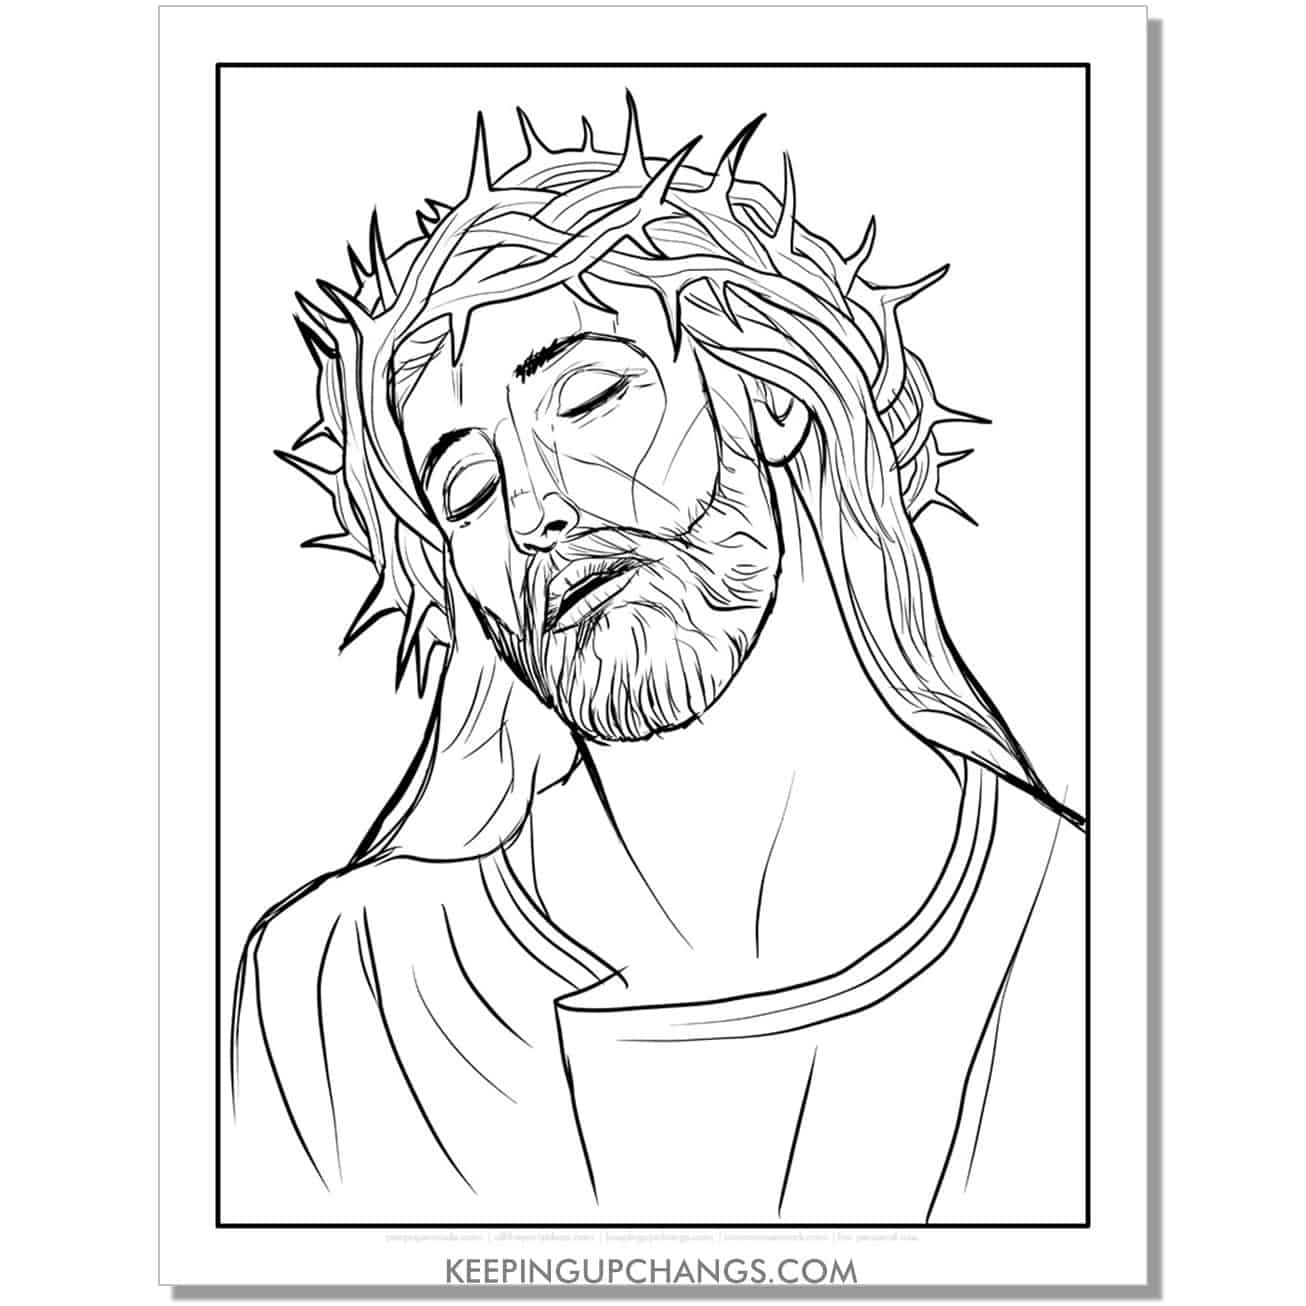 jesus christ wearing crown of thorns religious easter coloring page, sheet